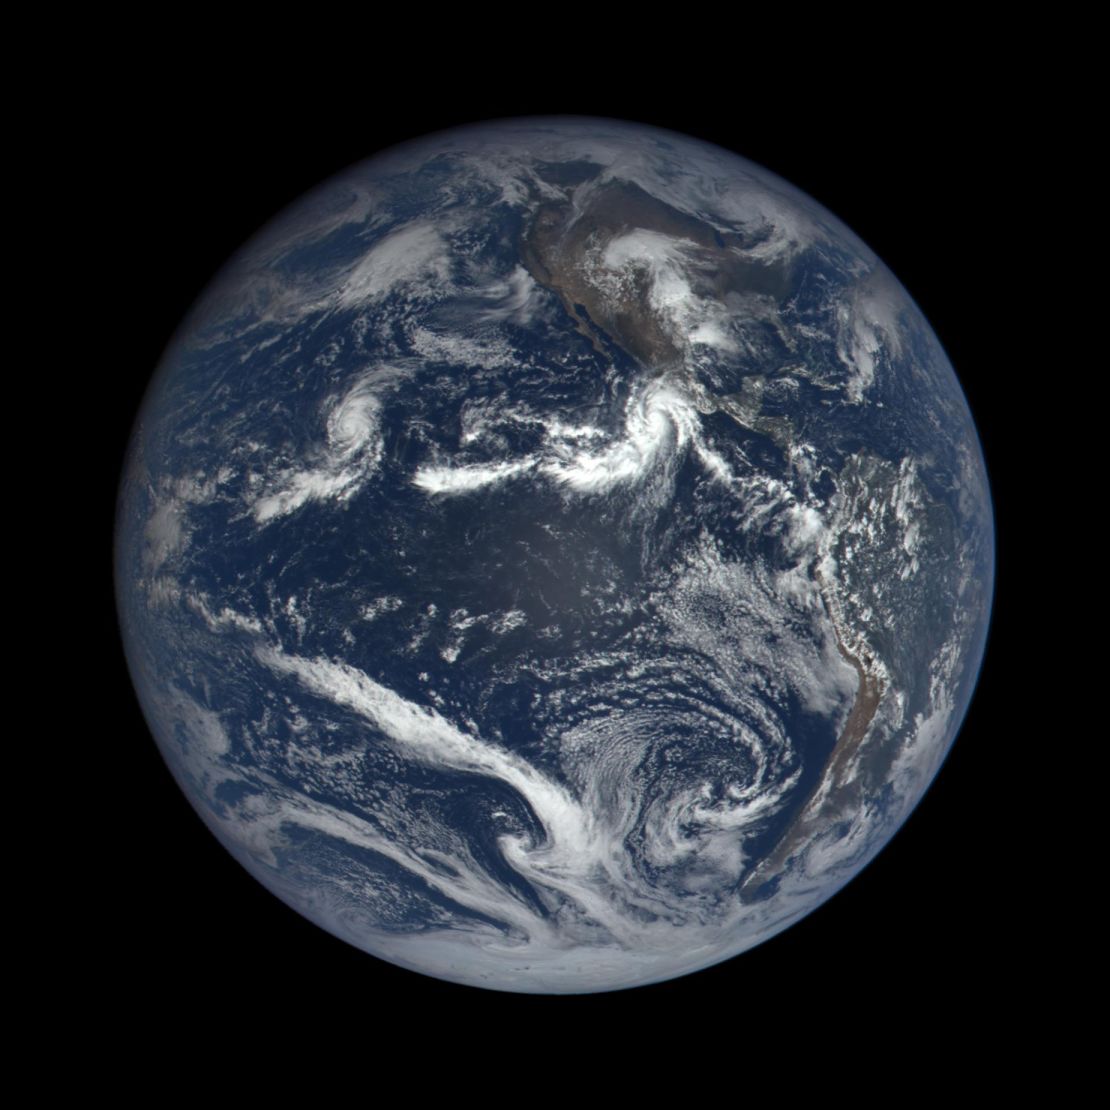 Hurricane Patricia captured by EPIC, the Earth Polychromatic Imaging Camera. The instrument flies on the Deep Space Climate Observatory (DSCOVR), a satellite built through a partnership between NASA, the National Oceanic and Atmospheric Administration (NOAA), and the U.S. Air Force. DSCOVR collects its images and measurements from a vantage point one million miles above the Earth and toward the Sun.

This image was captured nearly 1 million miles from earth at 4:00 pm EDT (19:00:18 GMT), on September 22, 2015.